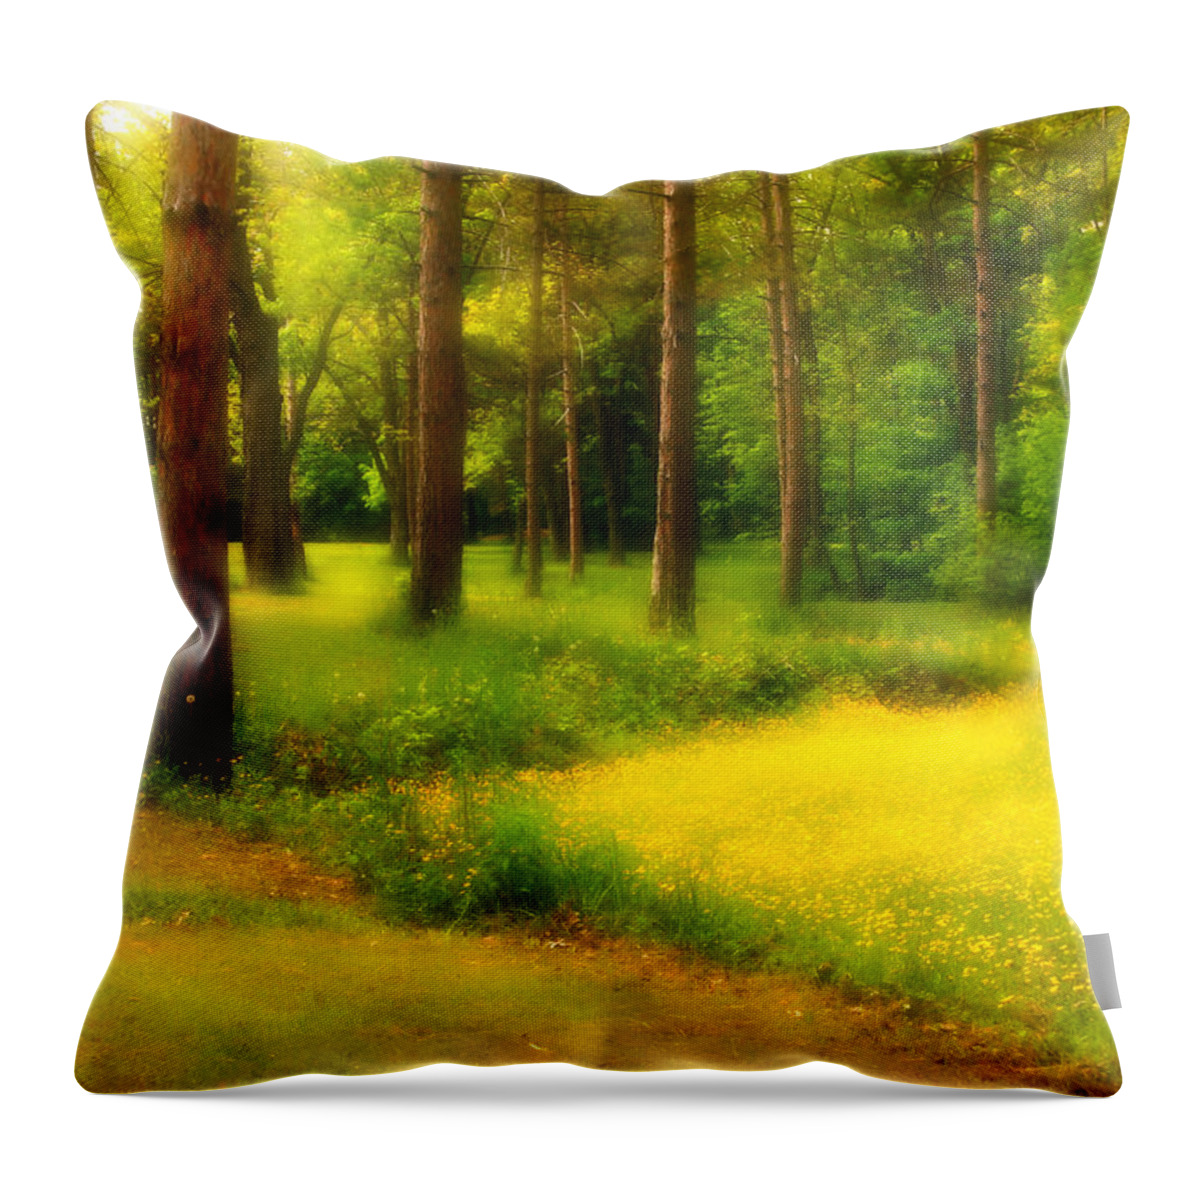 Beautiful Throw Pillow featuring the photograph Dreamy Meadow by Cindy Haggerty